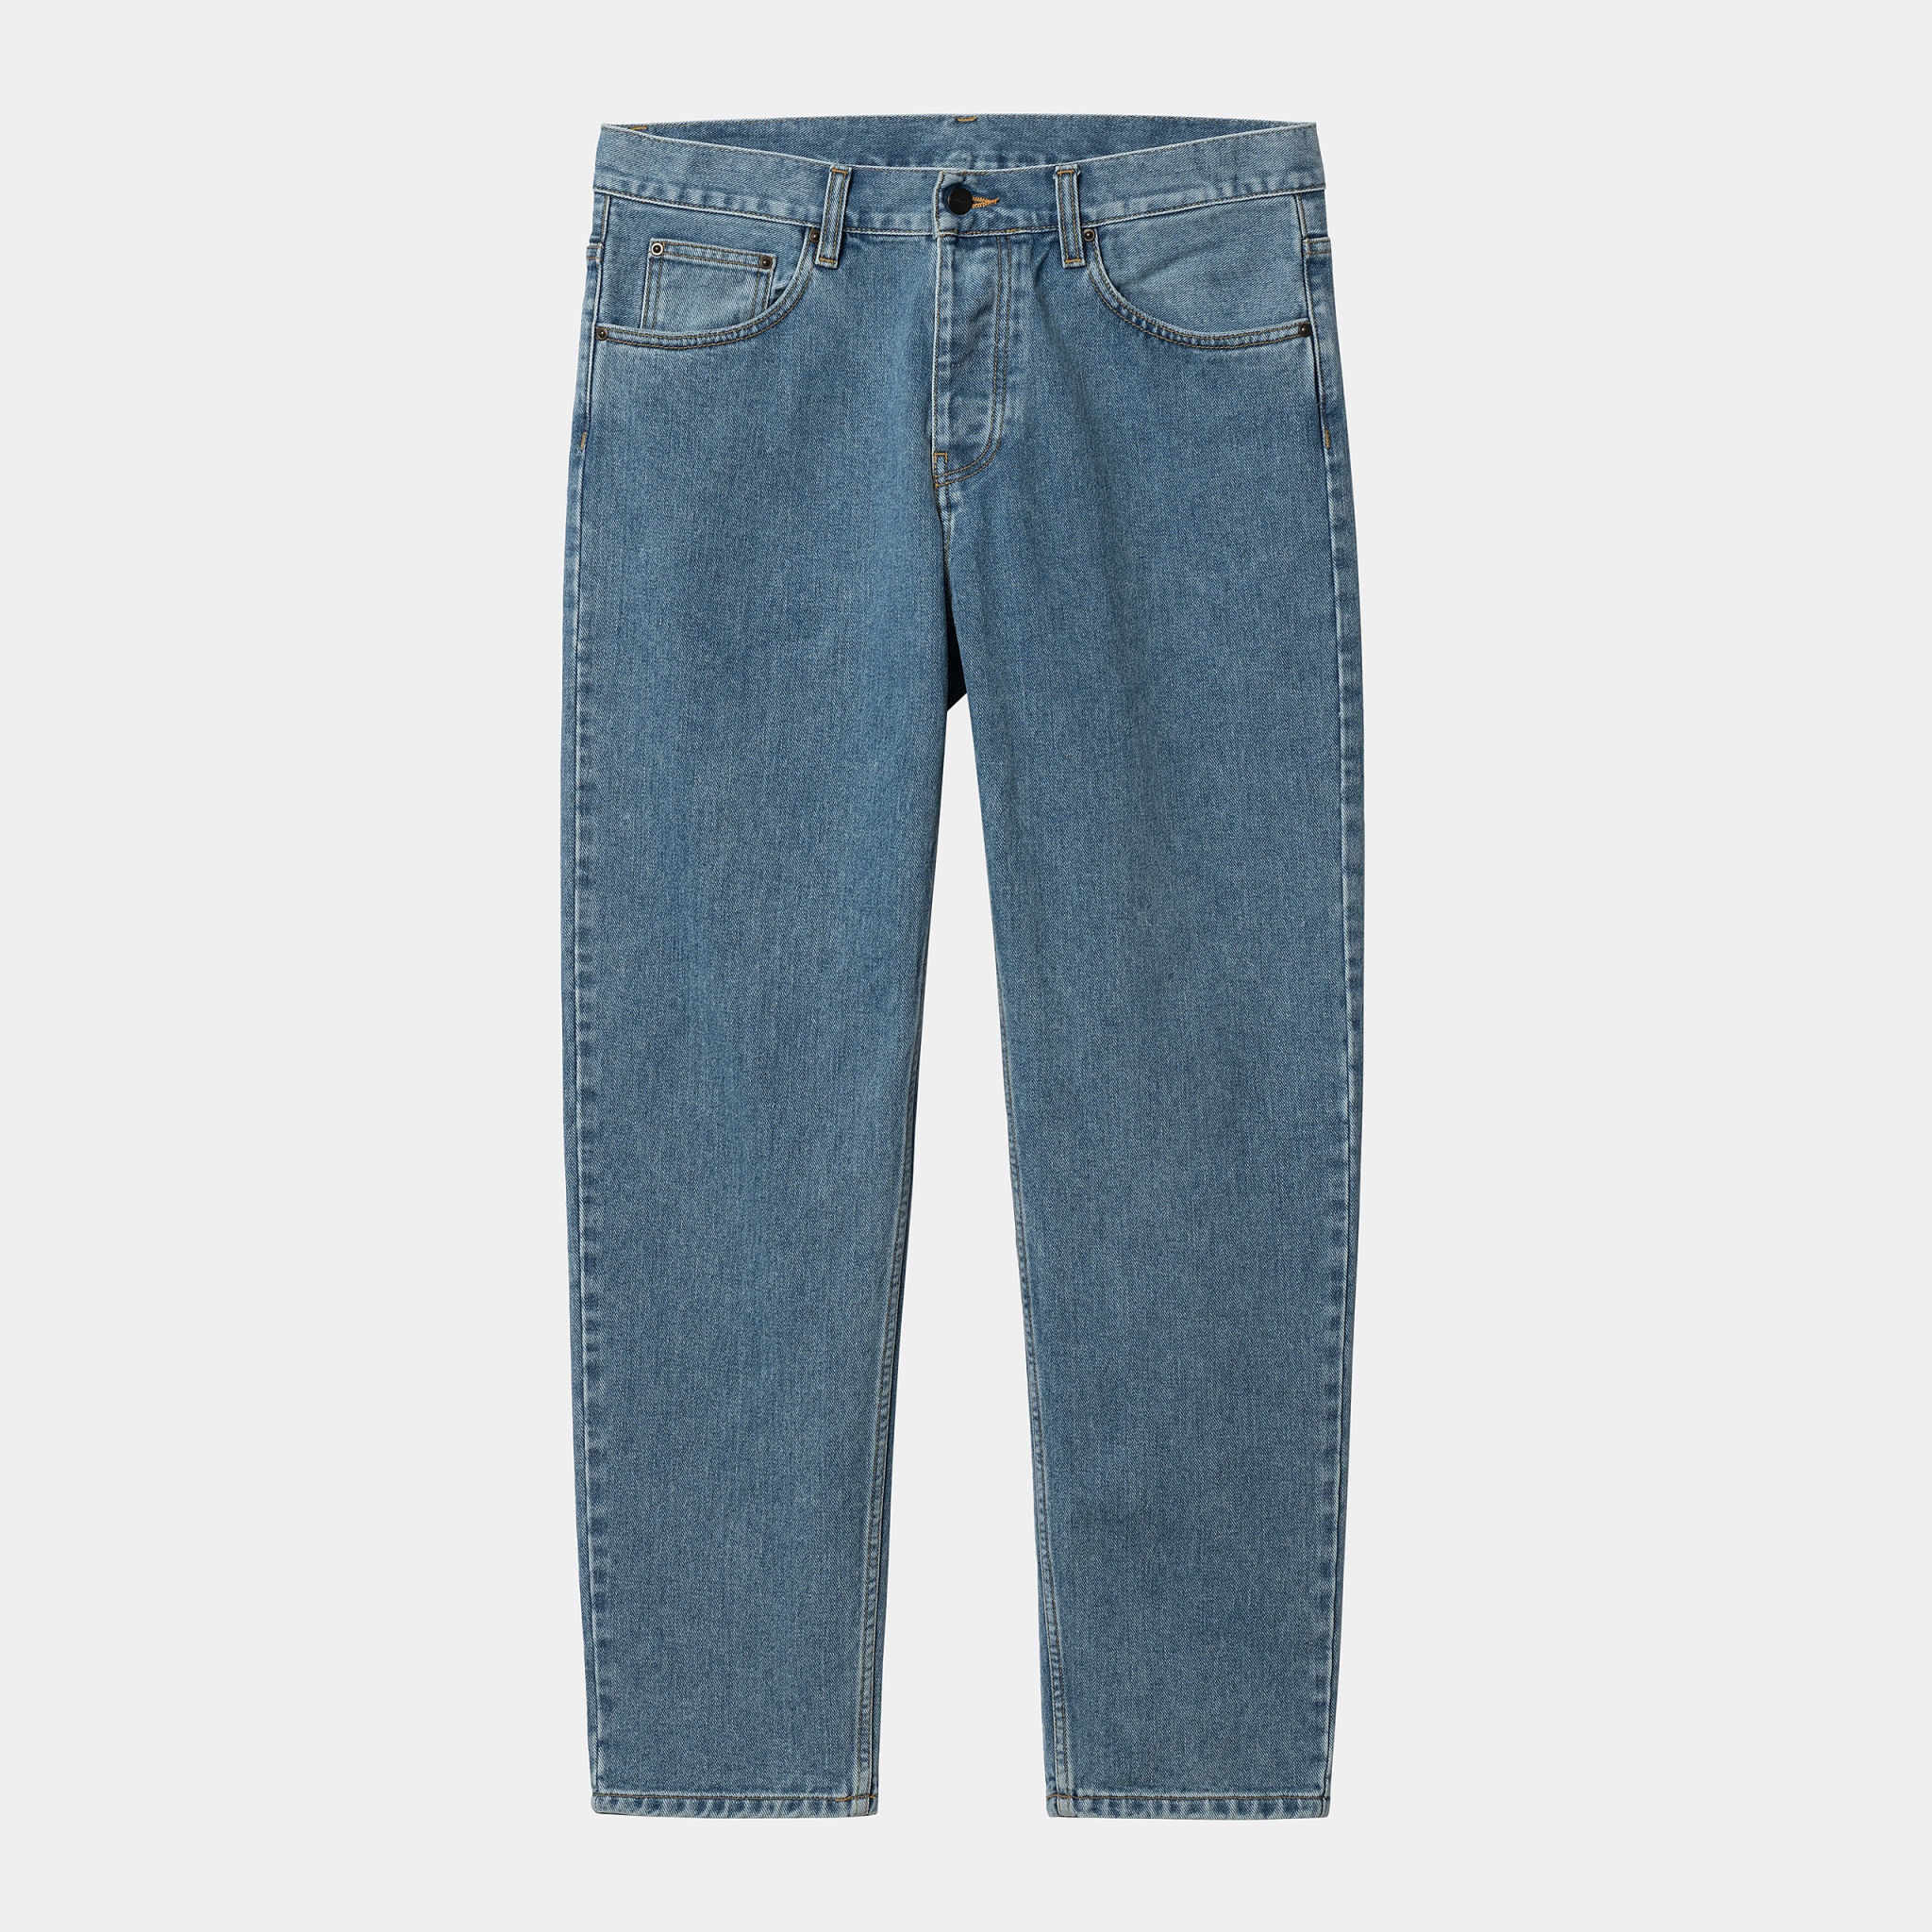 Carhartt WIP Newel Pant Blue Stone Washed - DIV. Amsterdam